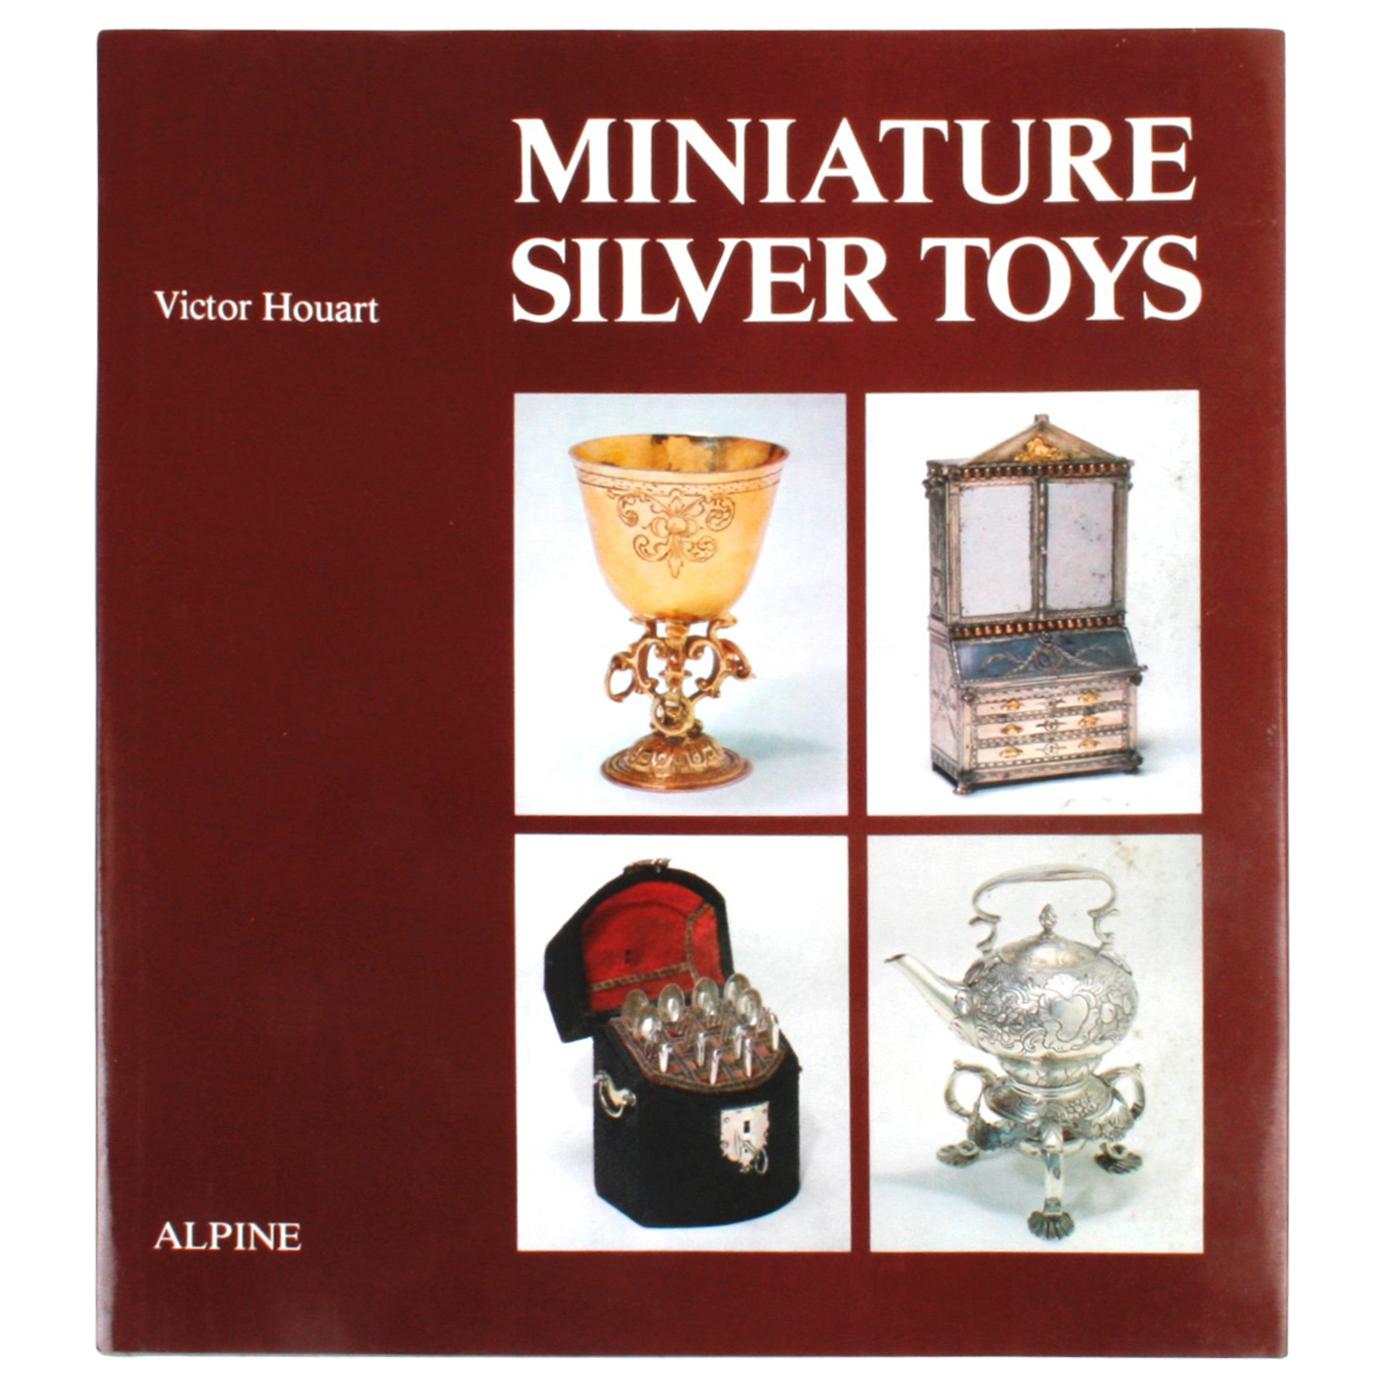 "Miniature Silver Toys" Book by Victor Houart